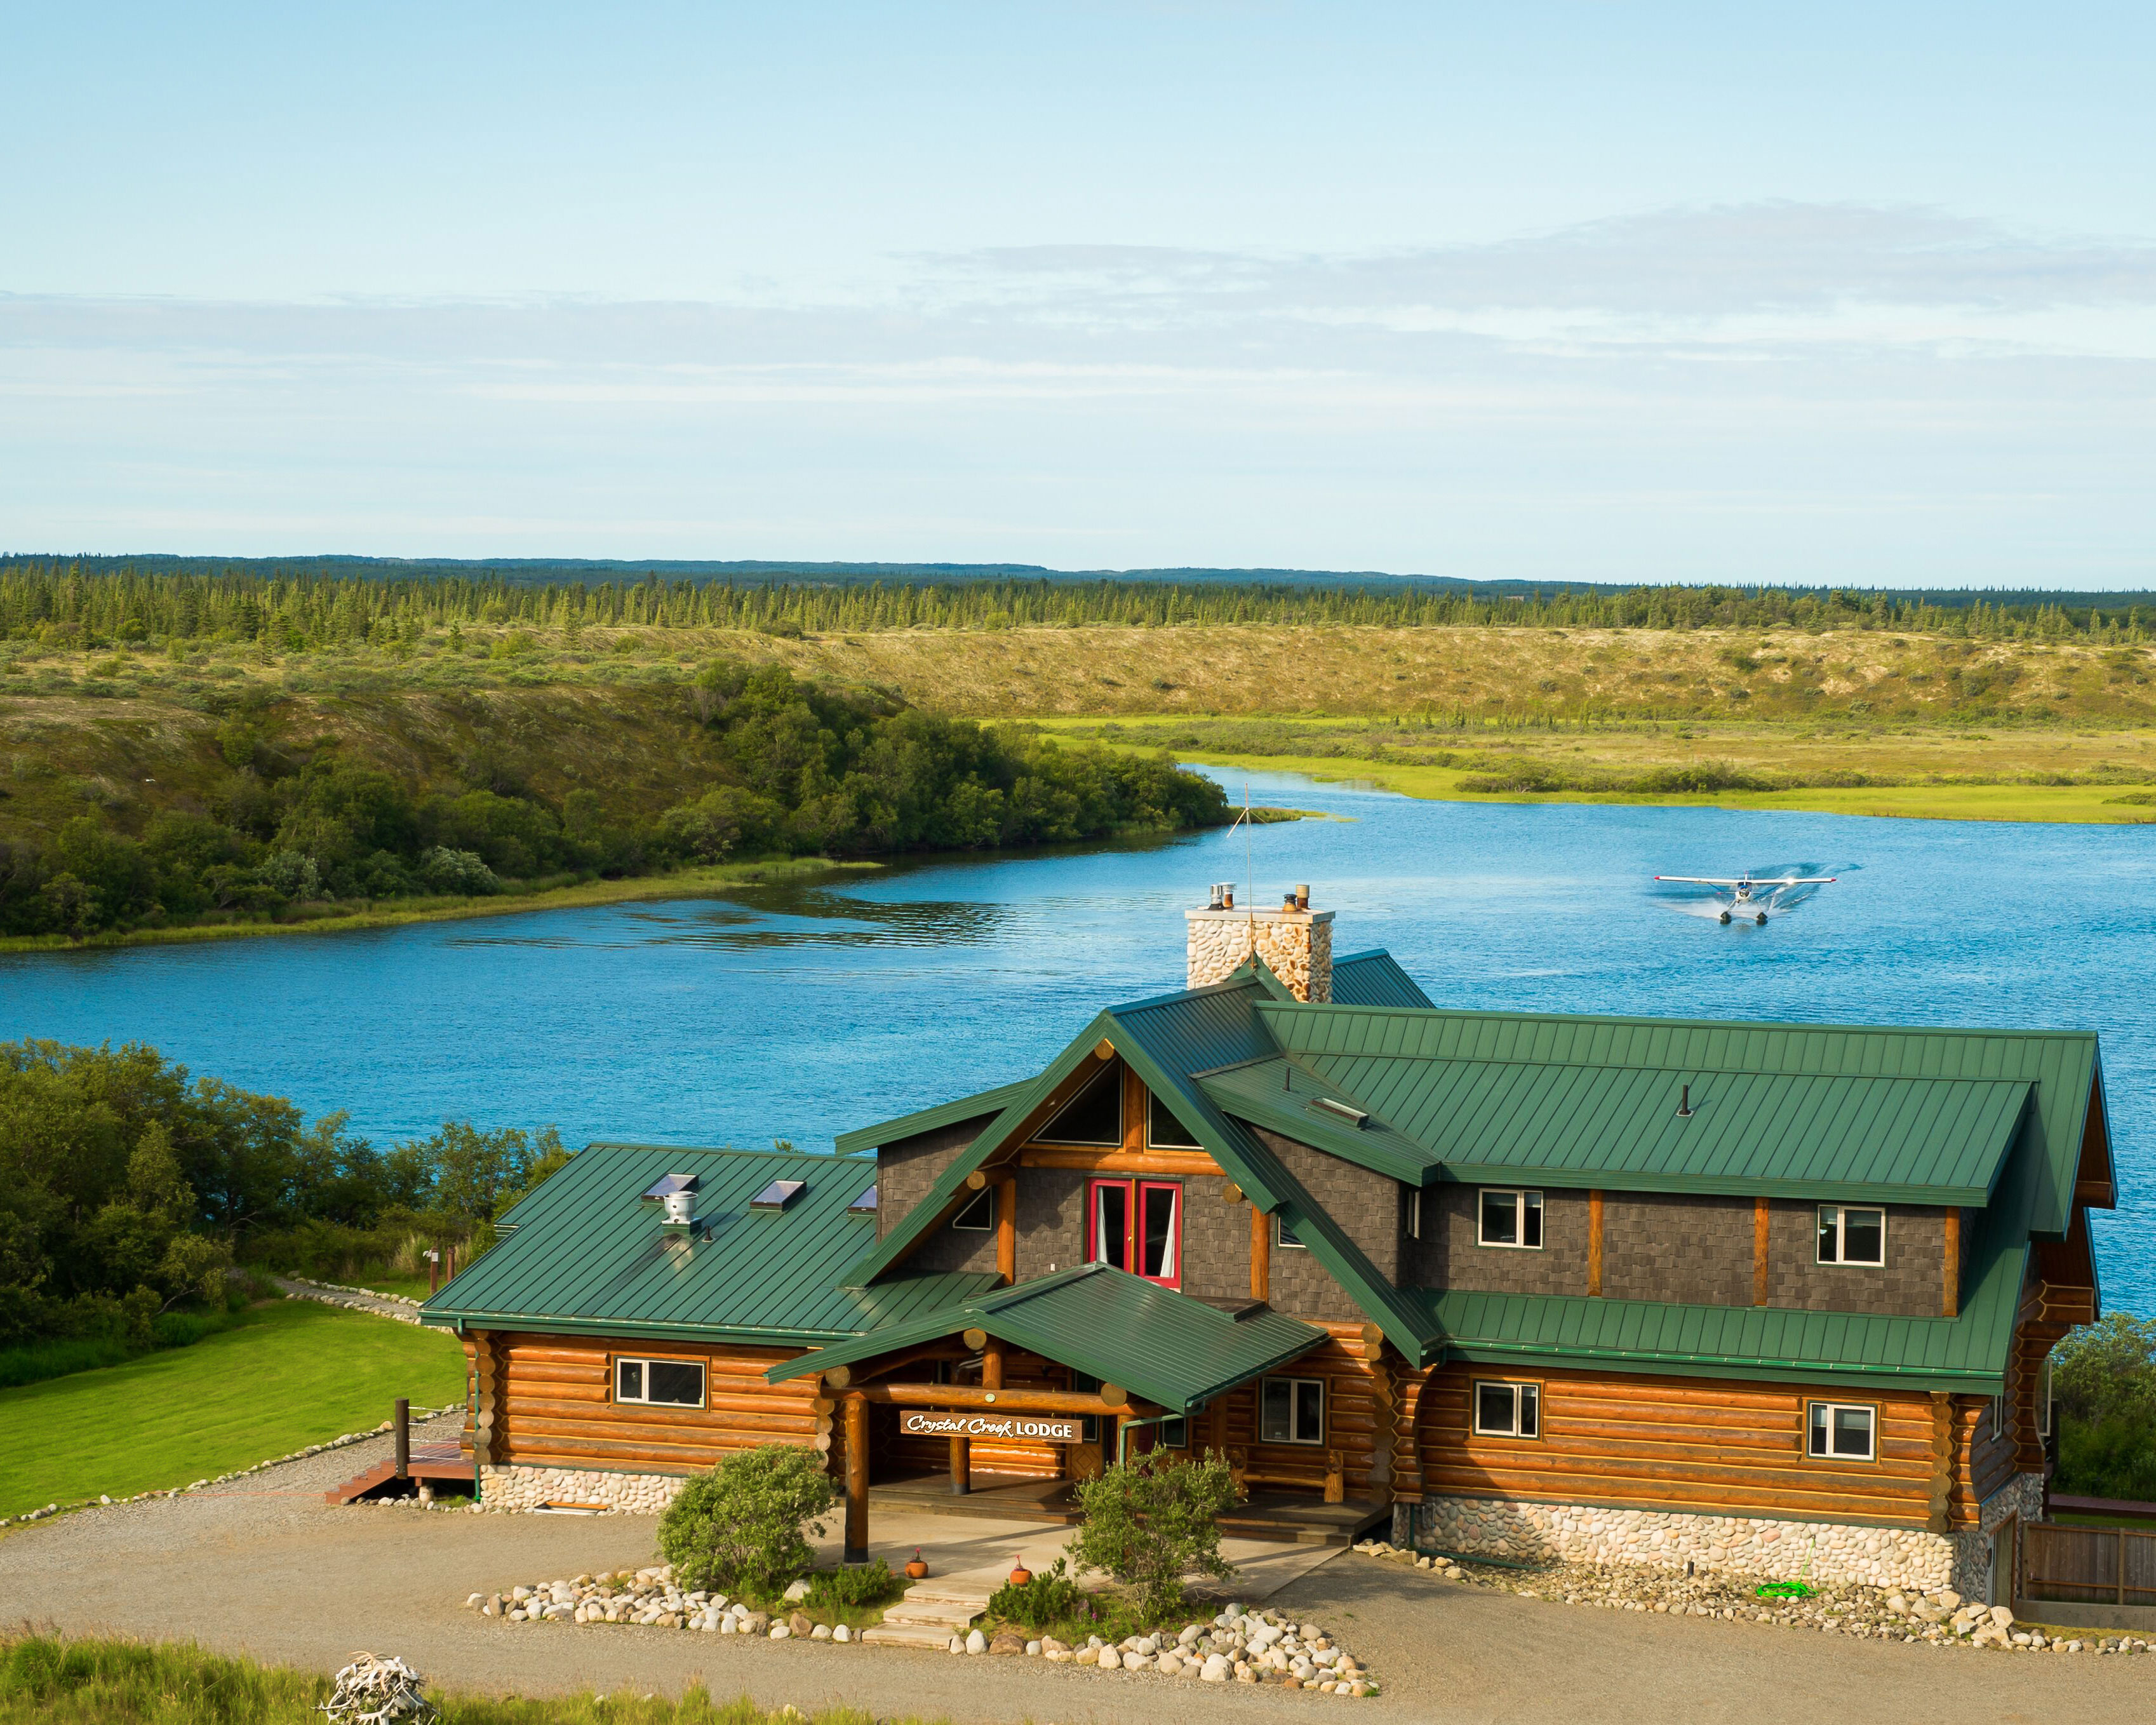 Alaska Wilderness Lodge Experience - Crystal Creek Lodge is a haven only accessible by floatplane.